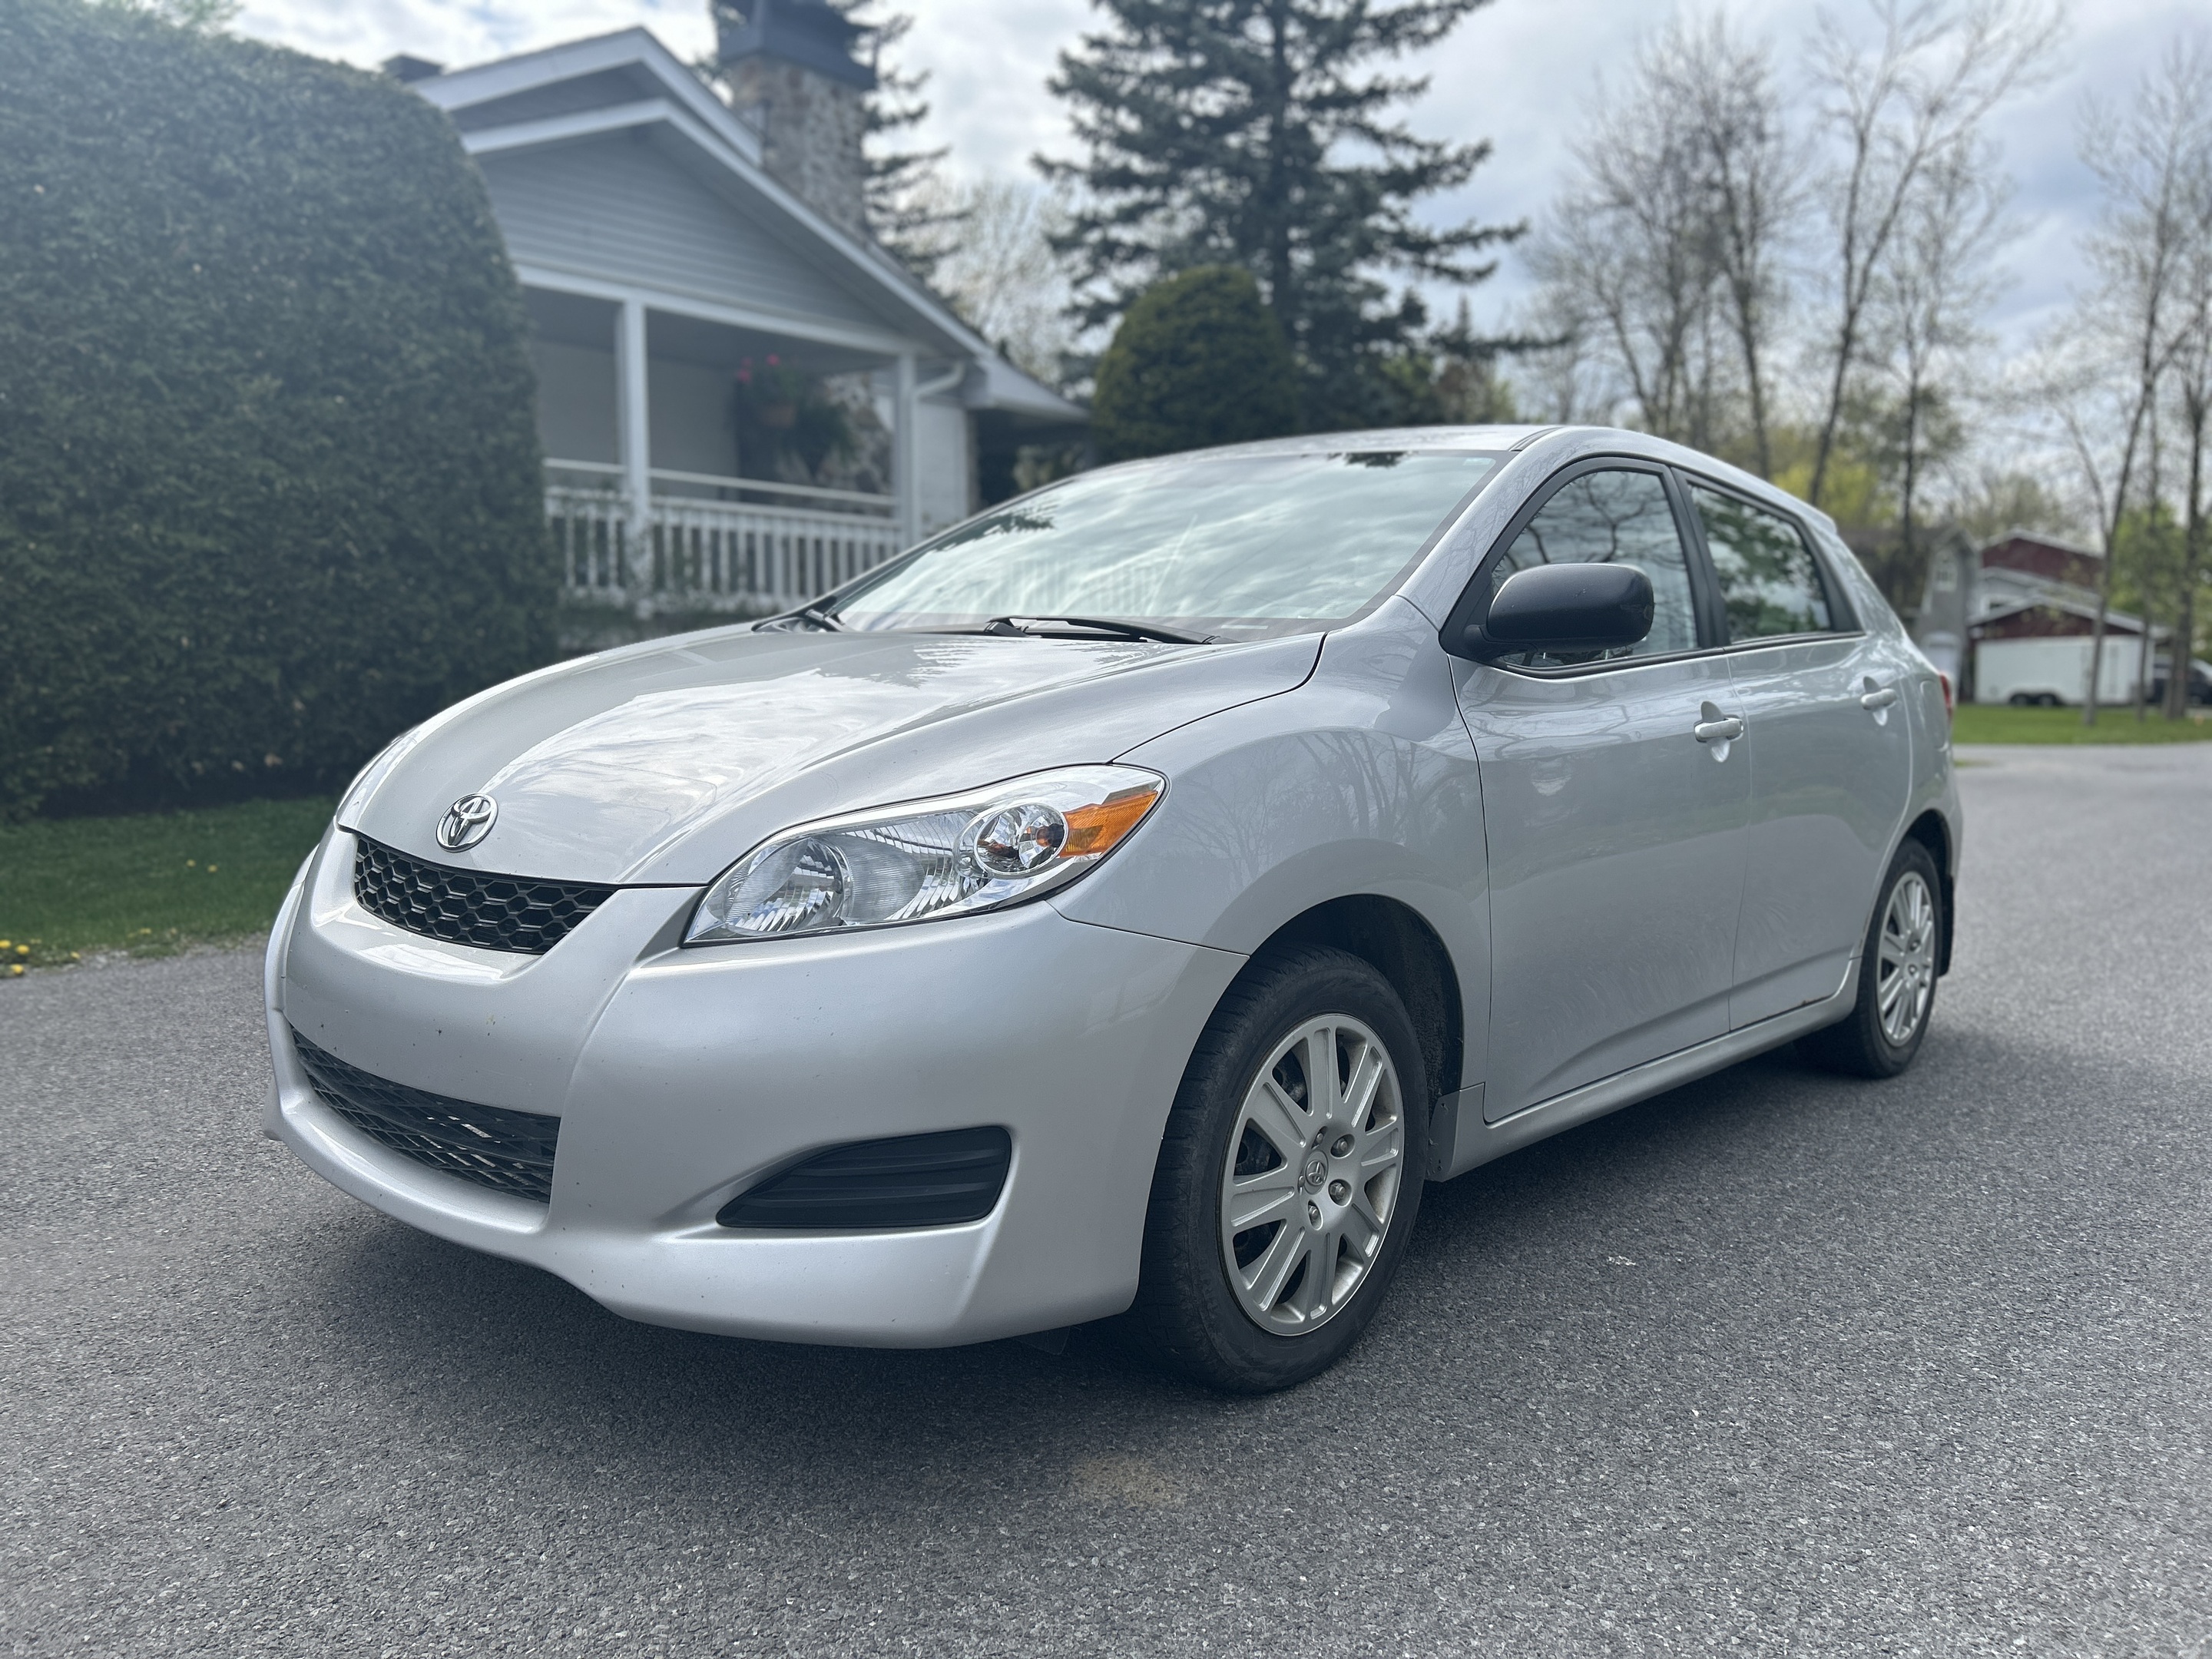 2013 Toyota Matrix 4dr Auto FWD | 1 OWNER | OIL CHANGED | VERY CLEAN